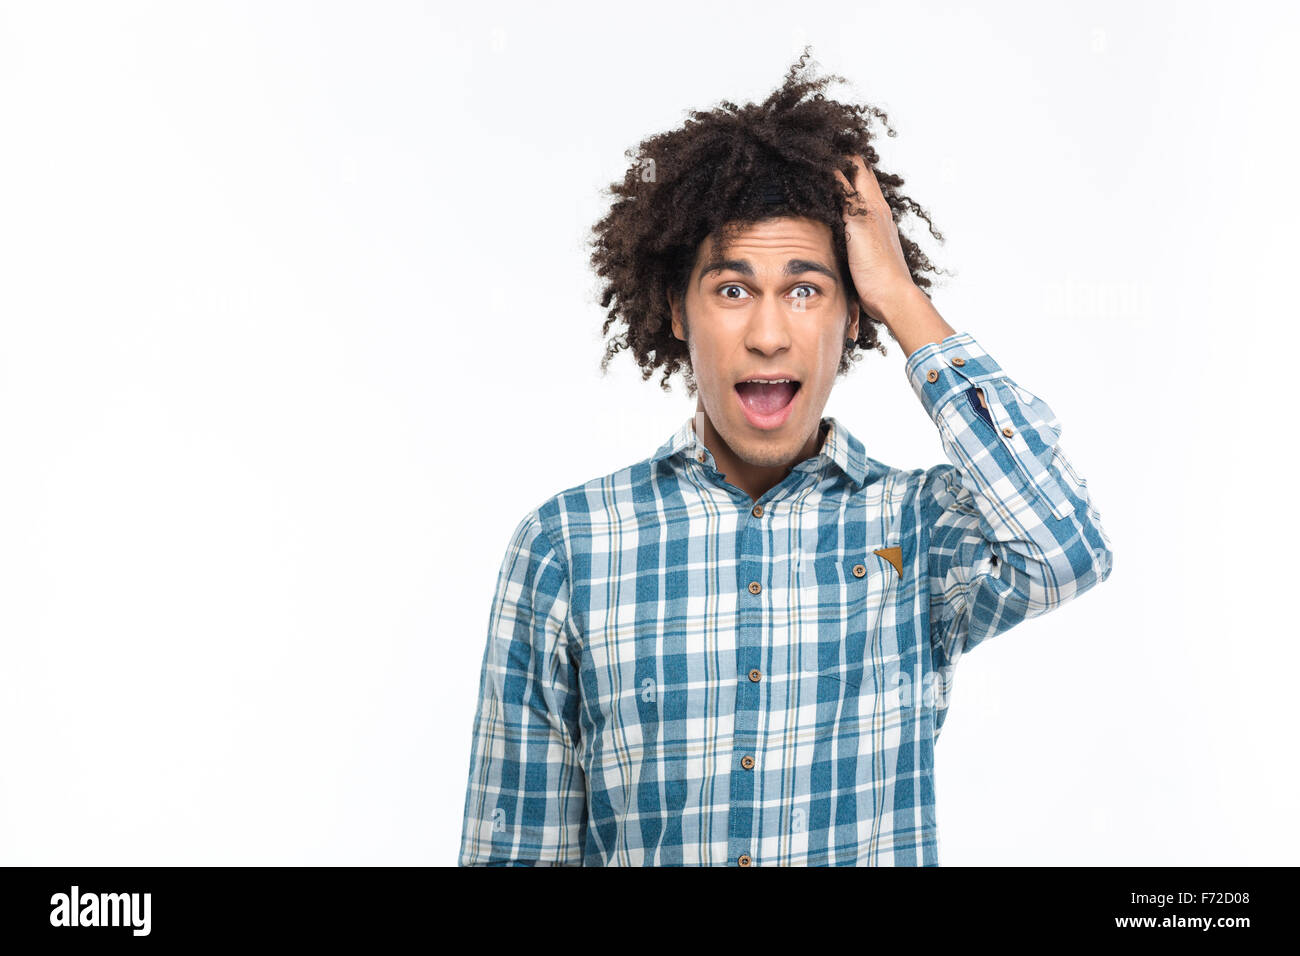 Portrait of amazed afro american man with curly hair looking at camera isolated on a white background Stock Photo